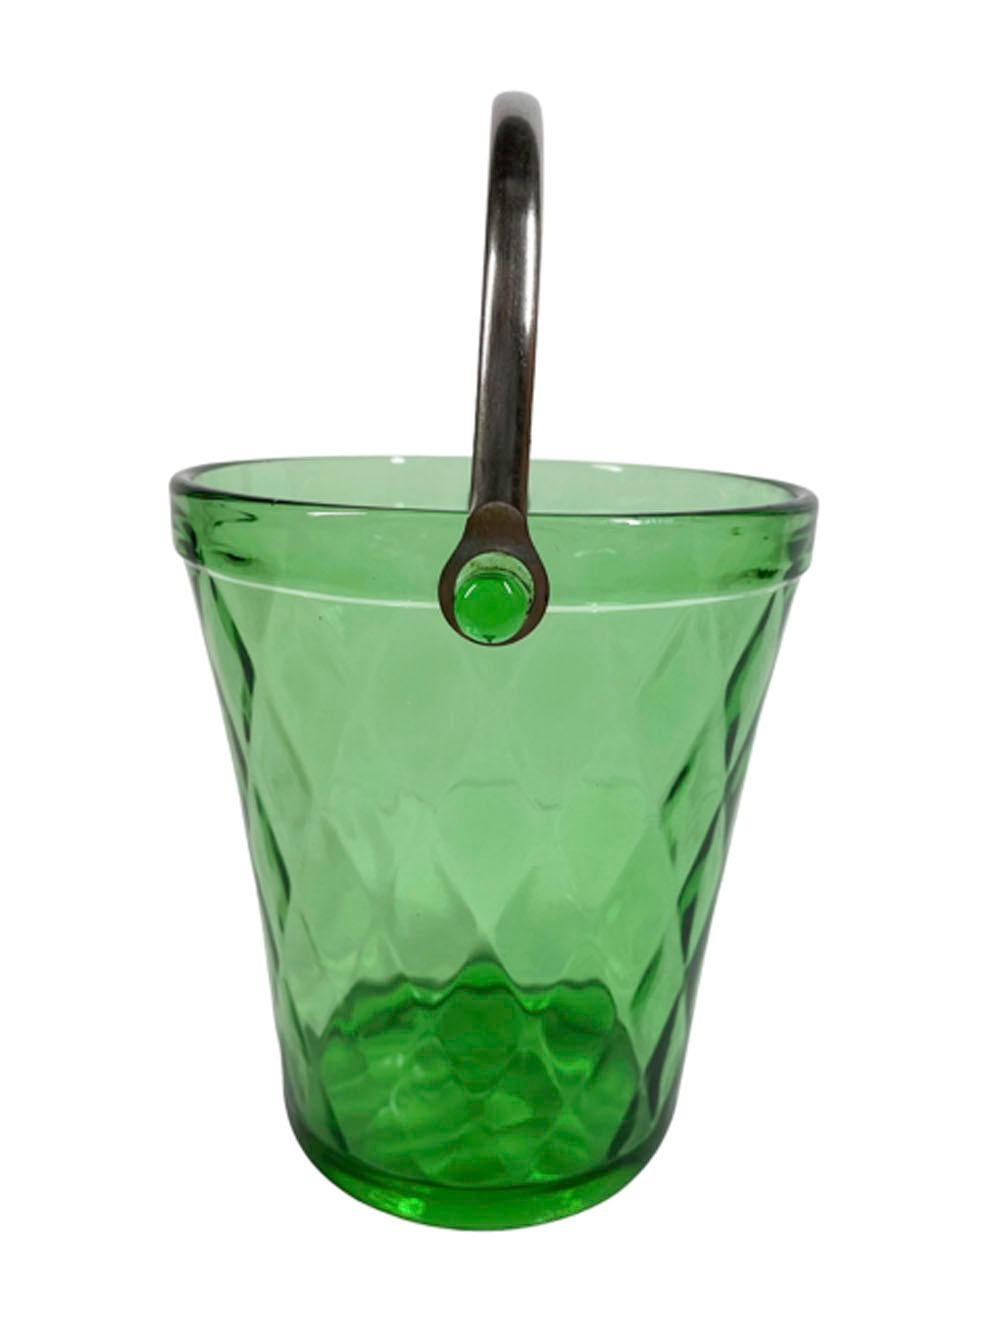 Art Deco green glass Ice bucket in mold-blown optic diamond pattern, the rim with molded lugs to which the metal swing handle attaches.